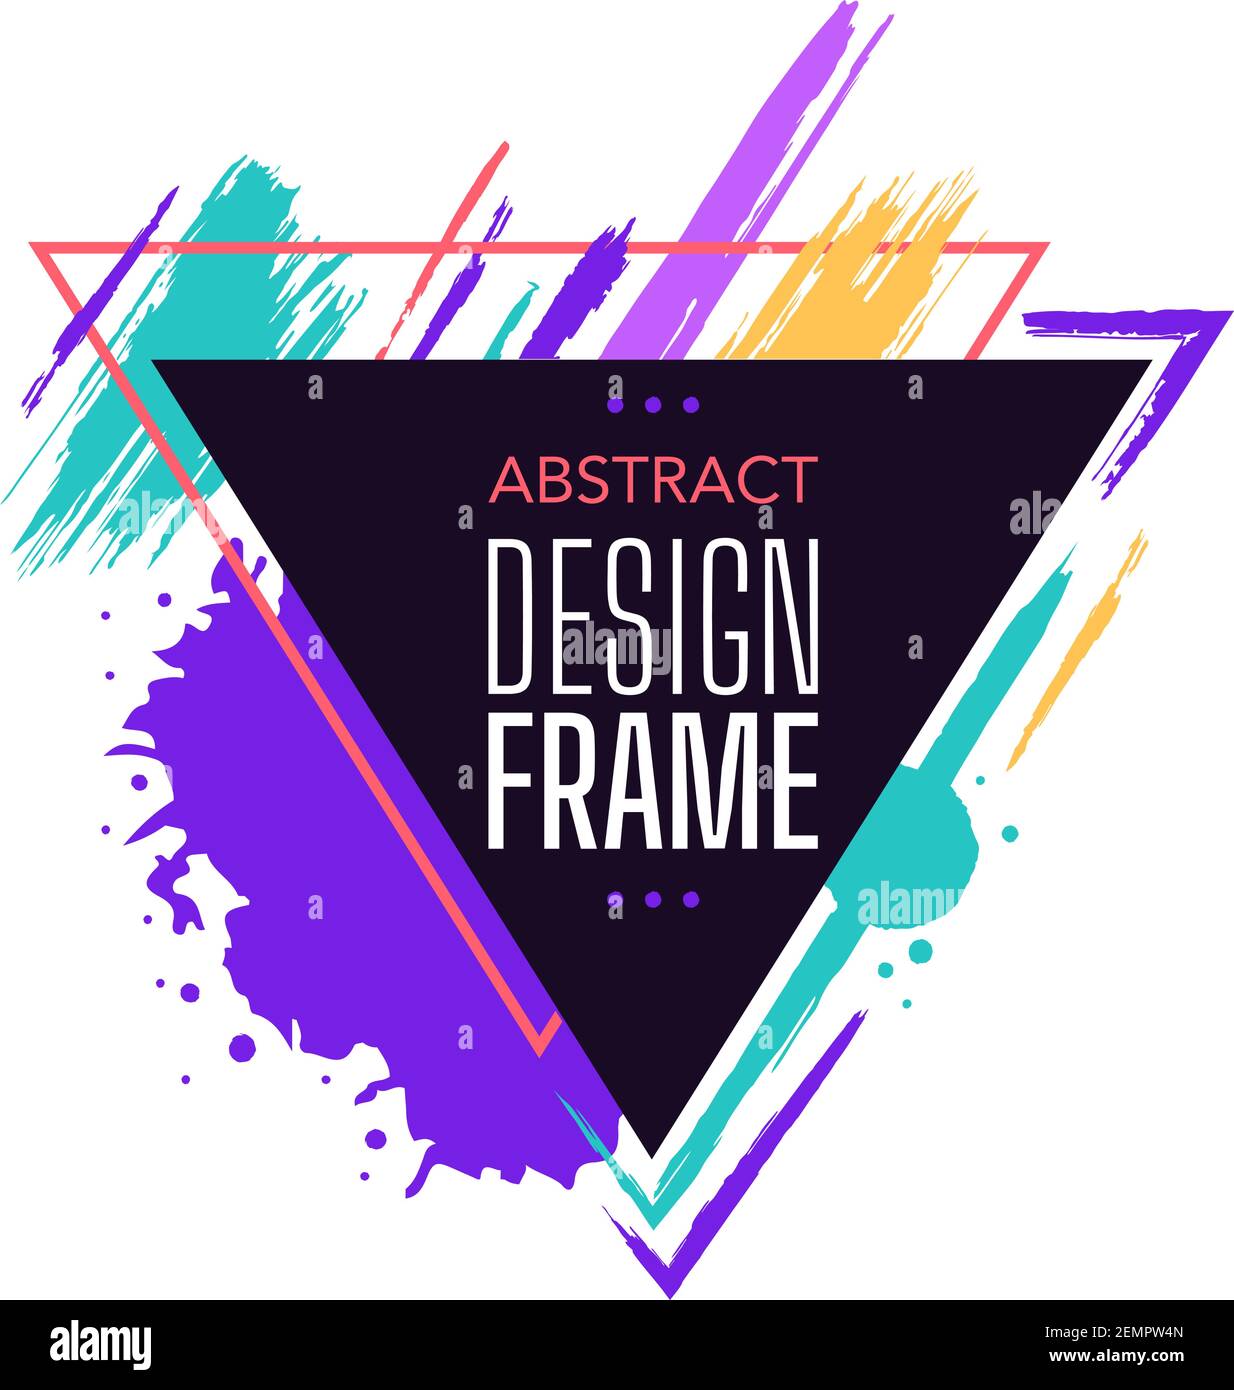 Abstarct design frame triangular with colored brush Stock Vector